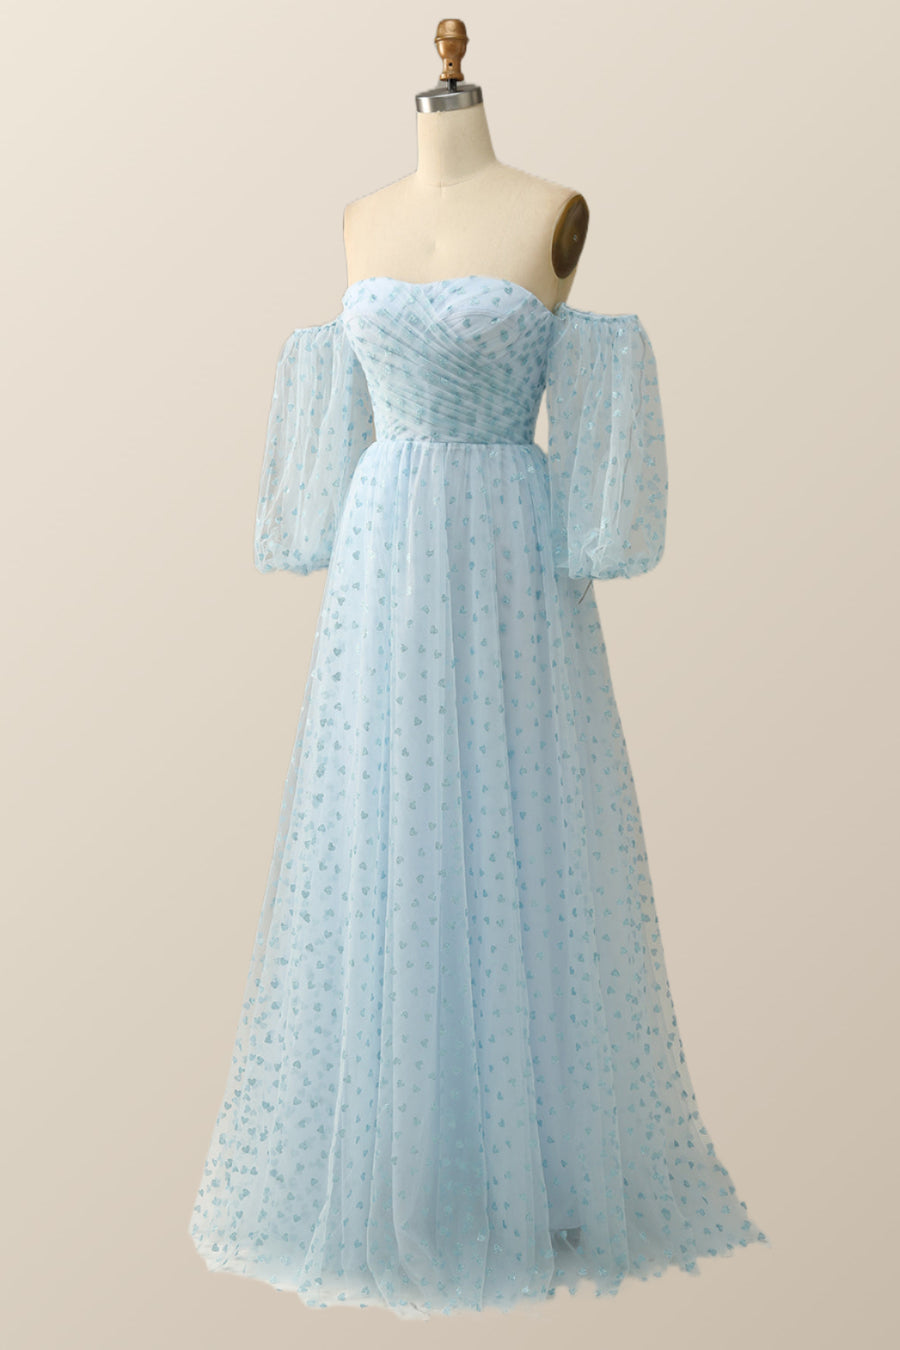 Blue Hearts Printed Tulle Long Formal Dress with Puffy Sleeves